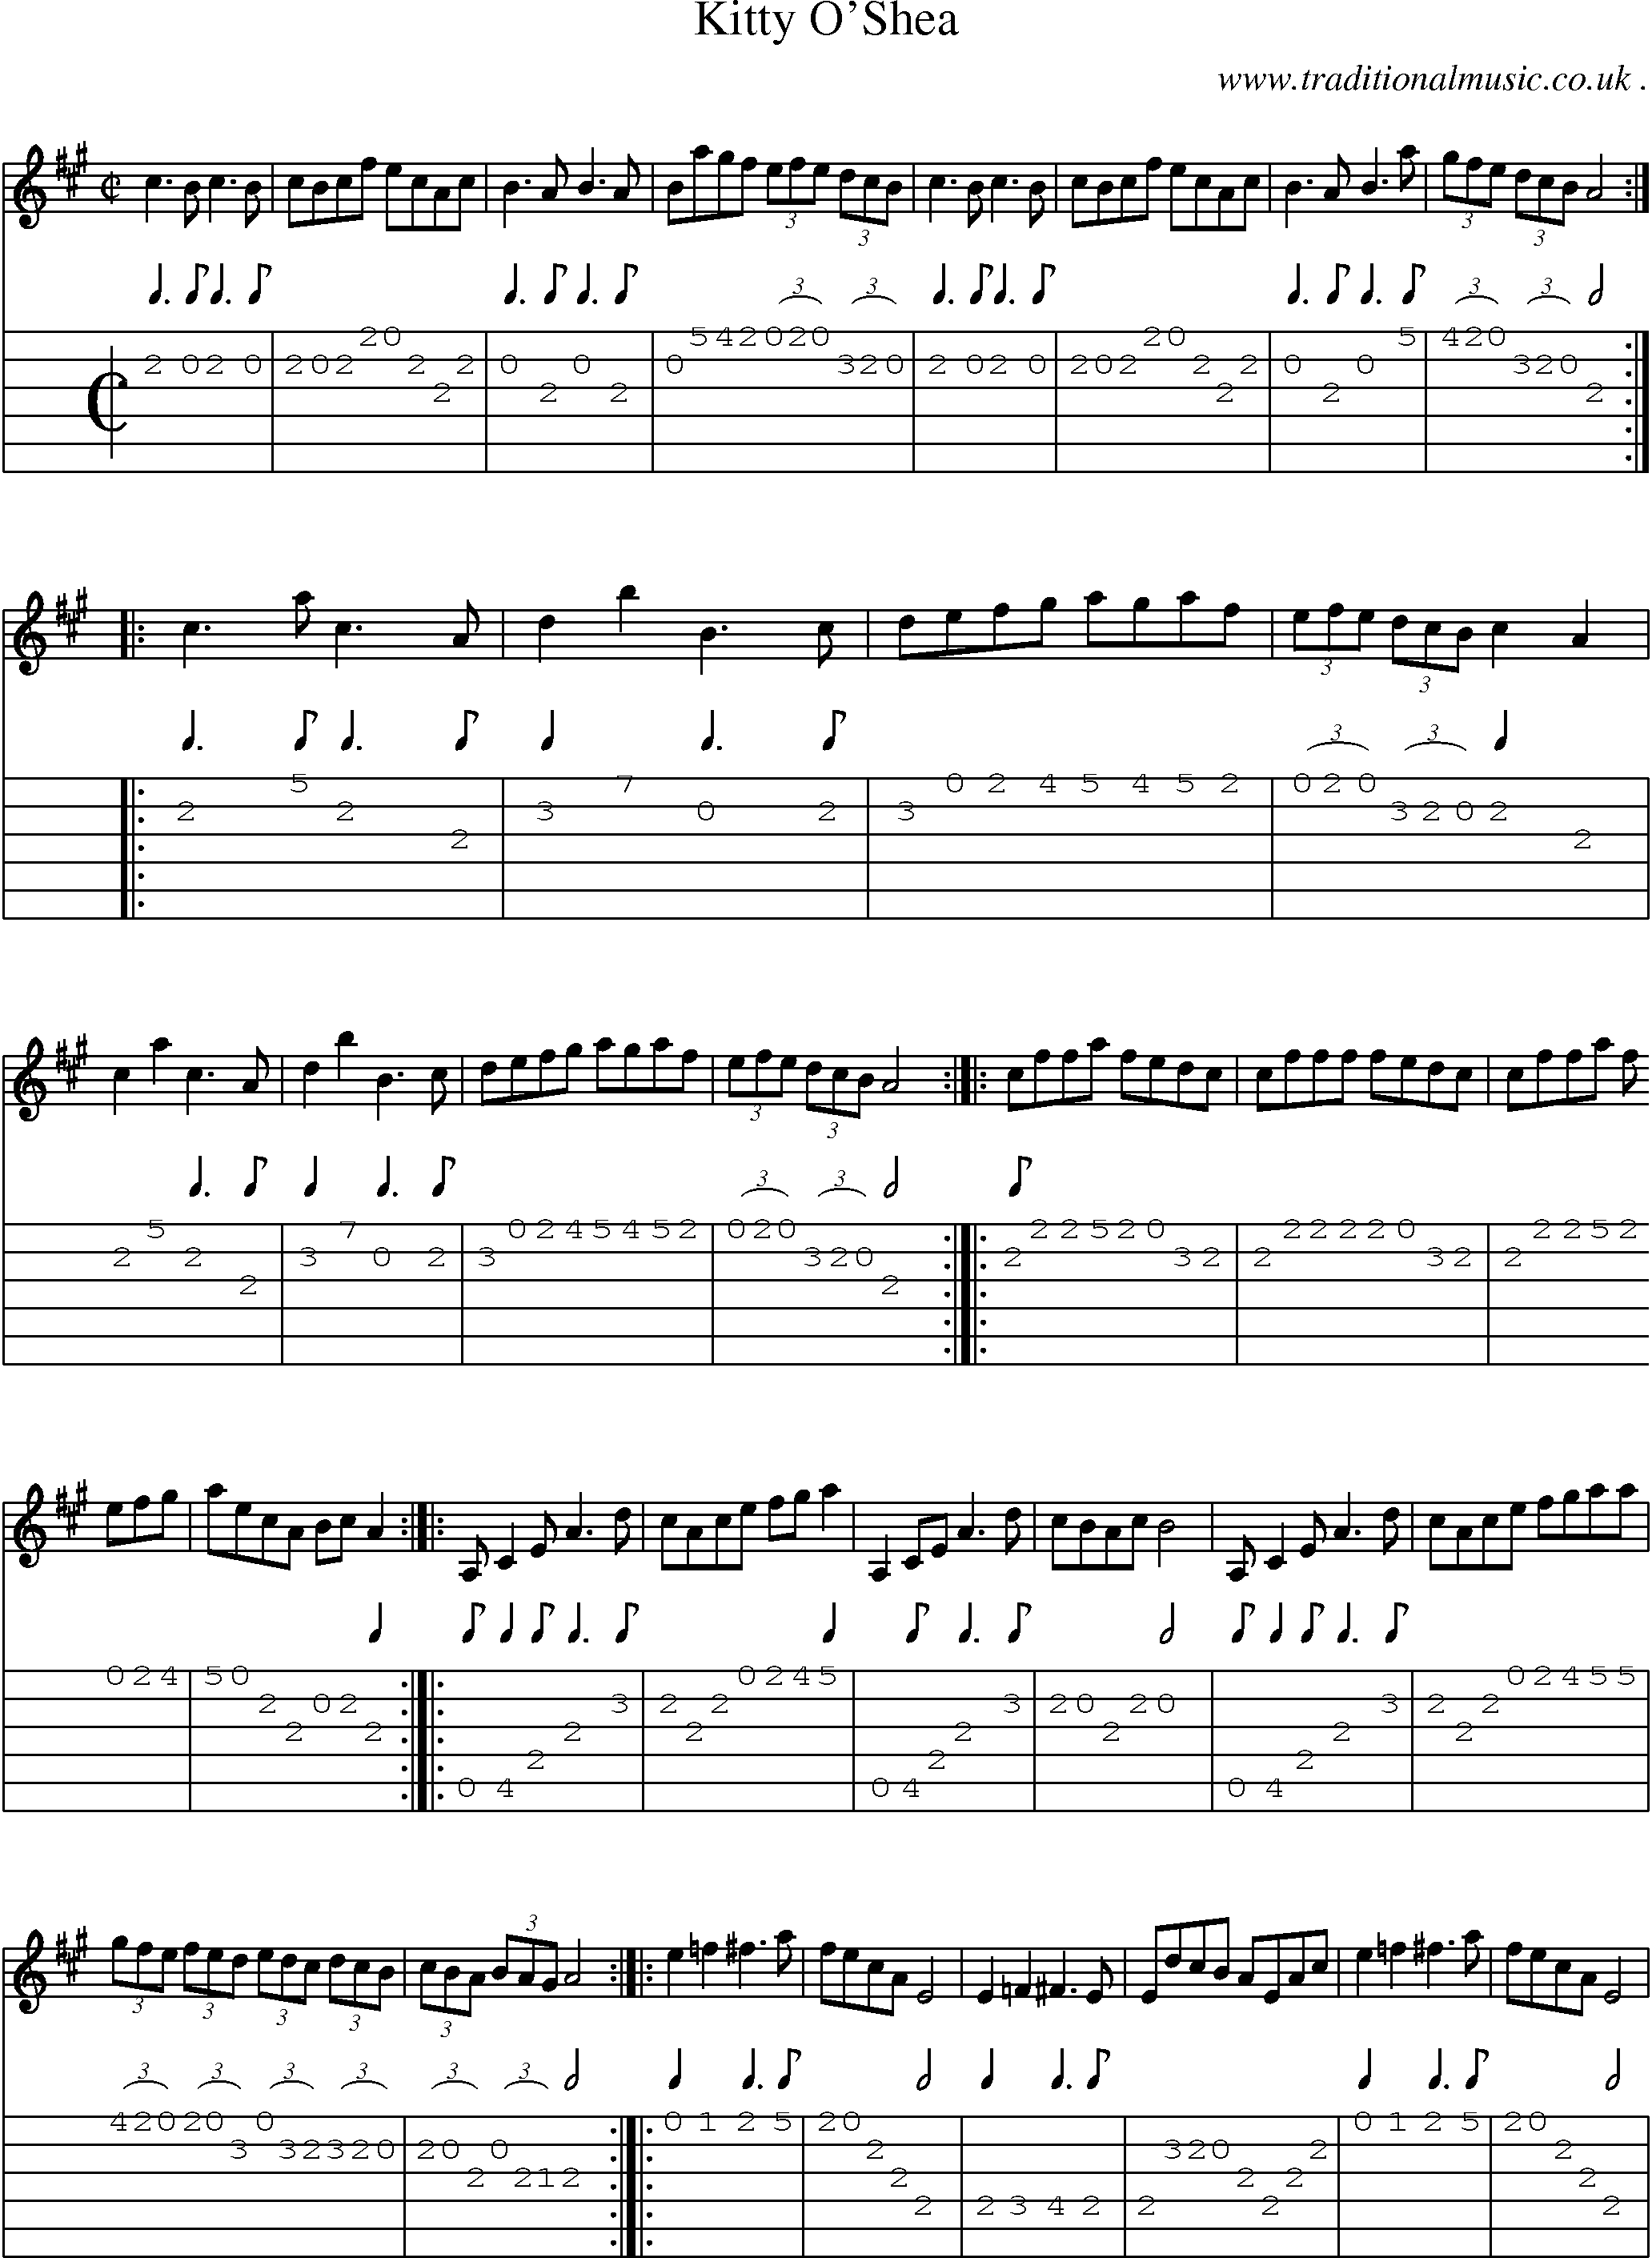 Sheet-Music and Guitar Tabs for Kitty Oshea